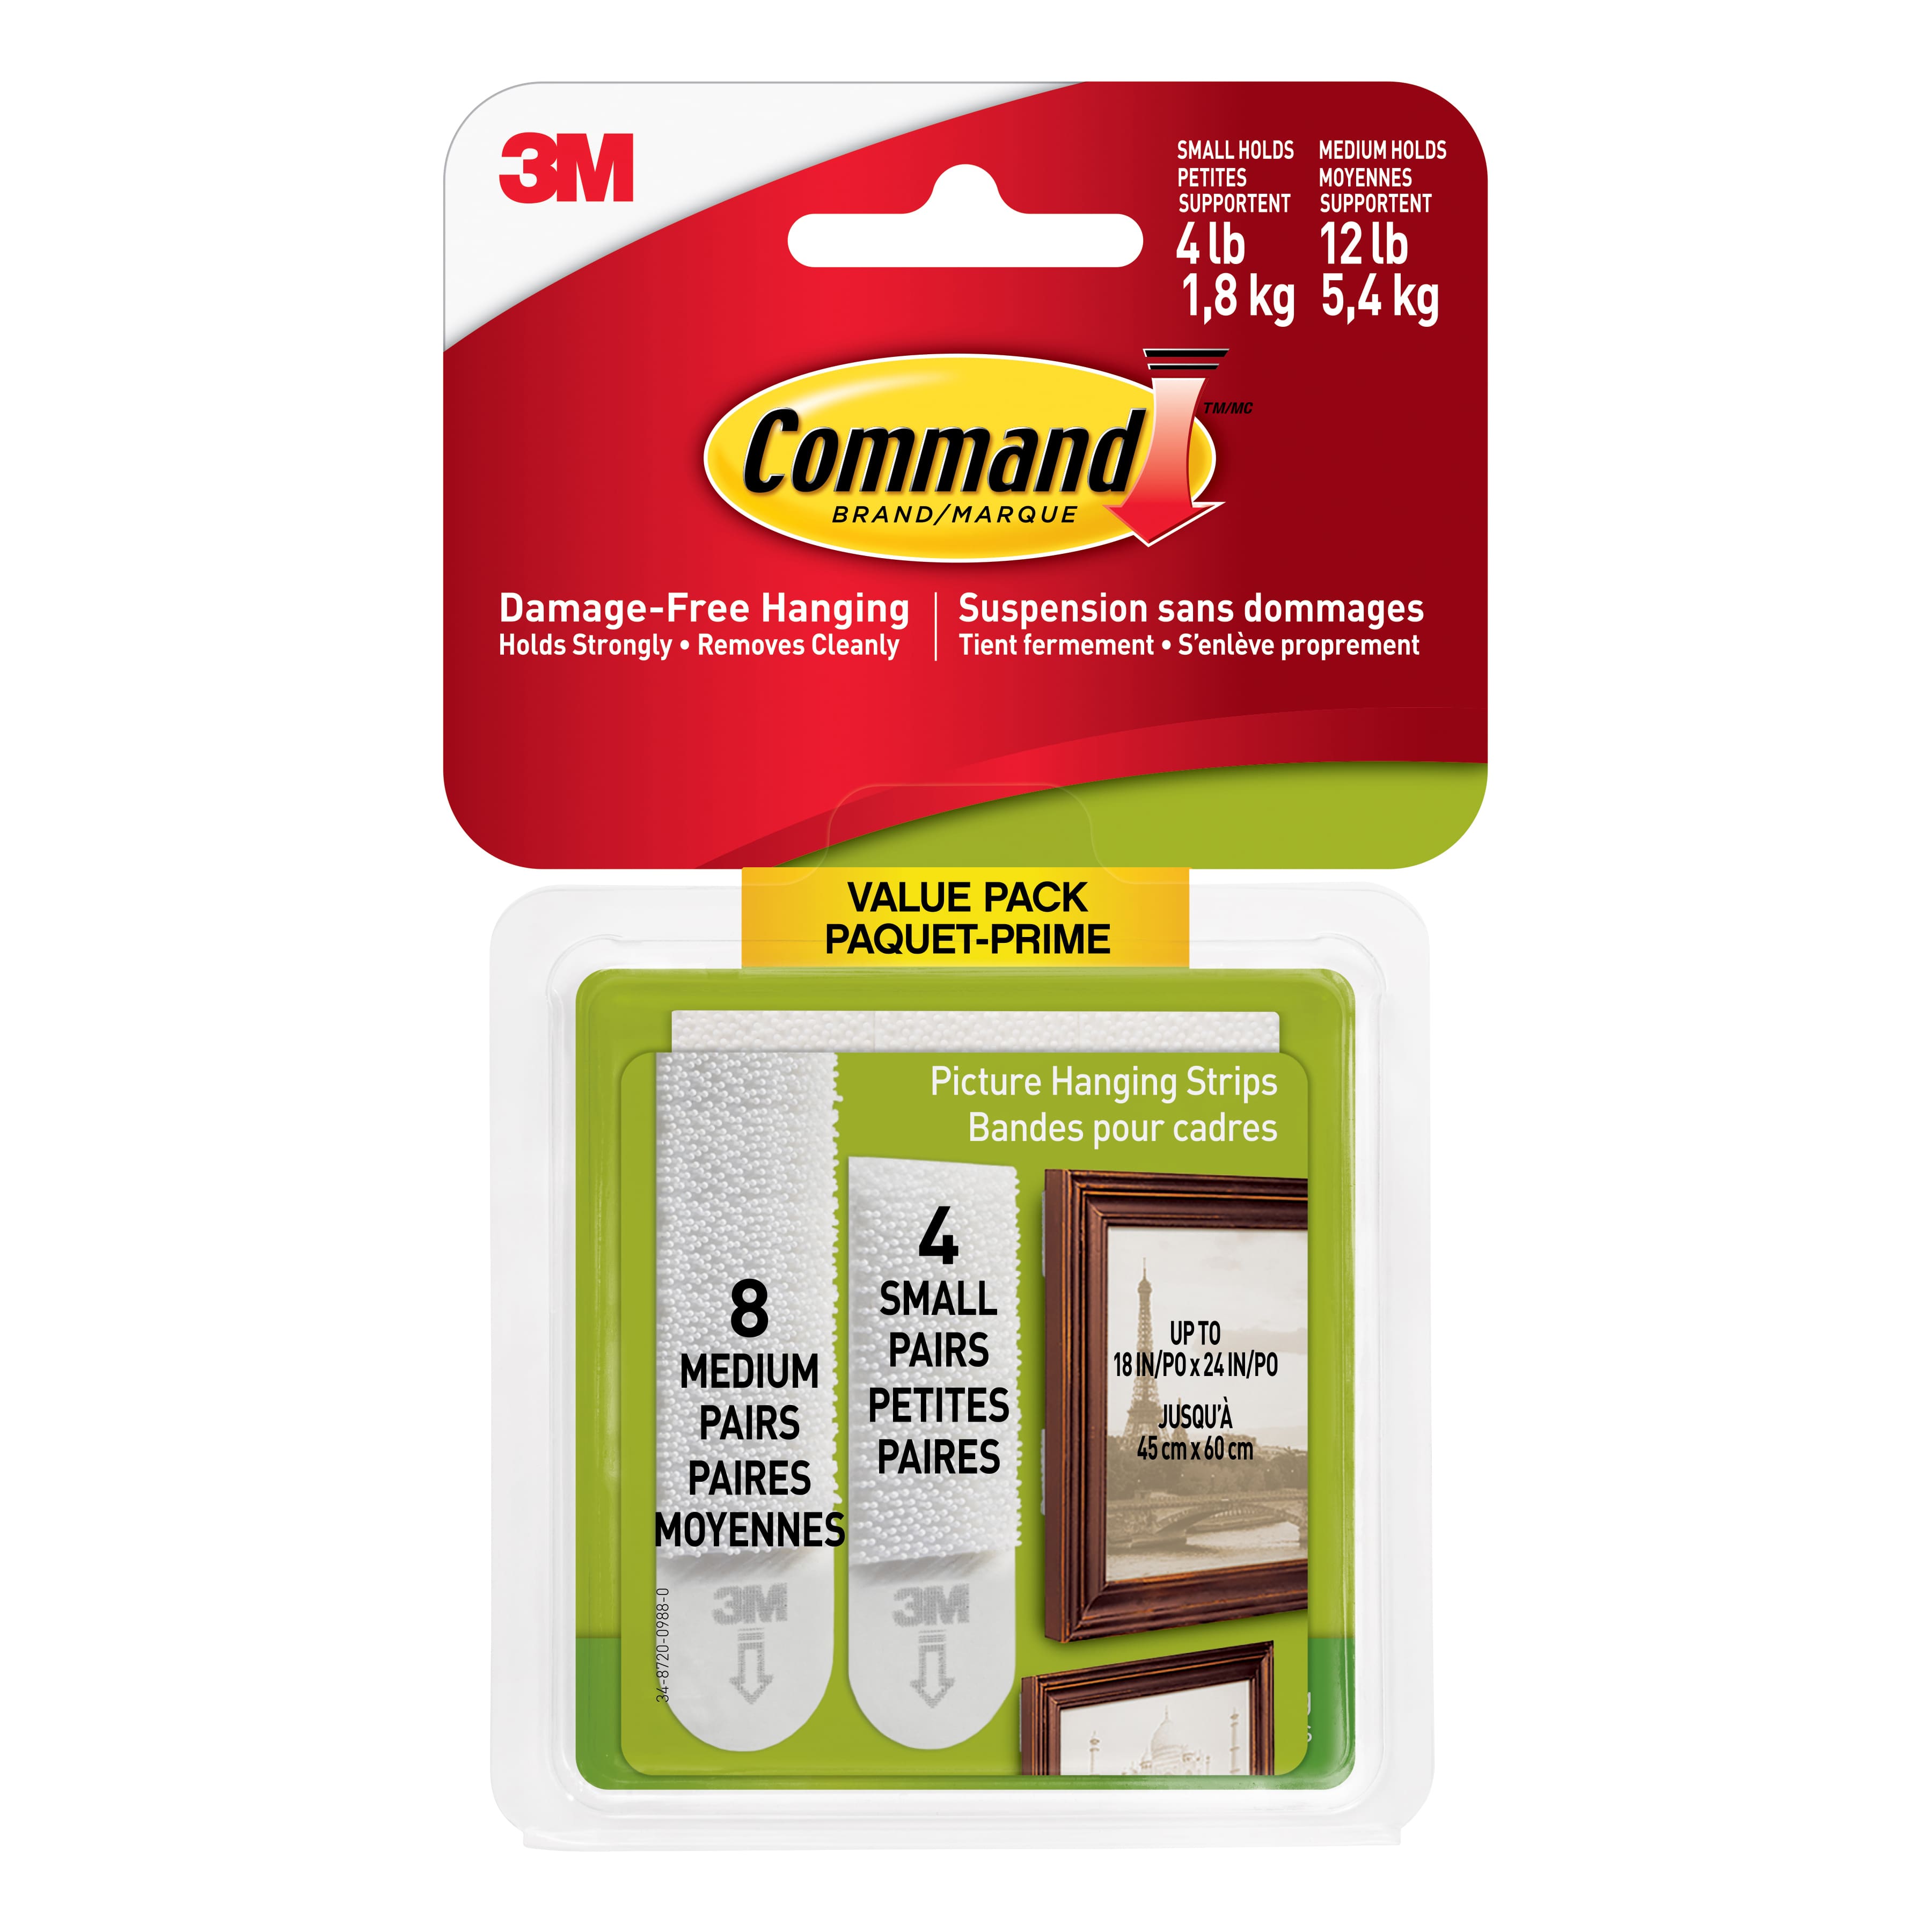 3M Command Poster Strips Damage Hanging 16 Poster Strips for sale online